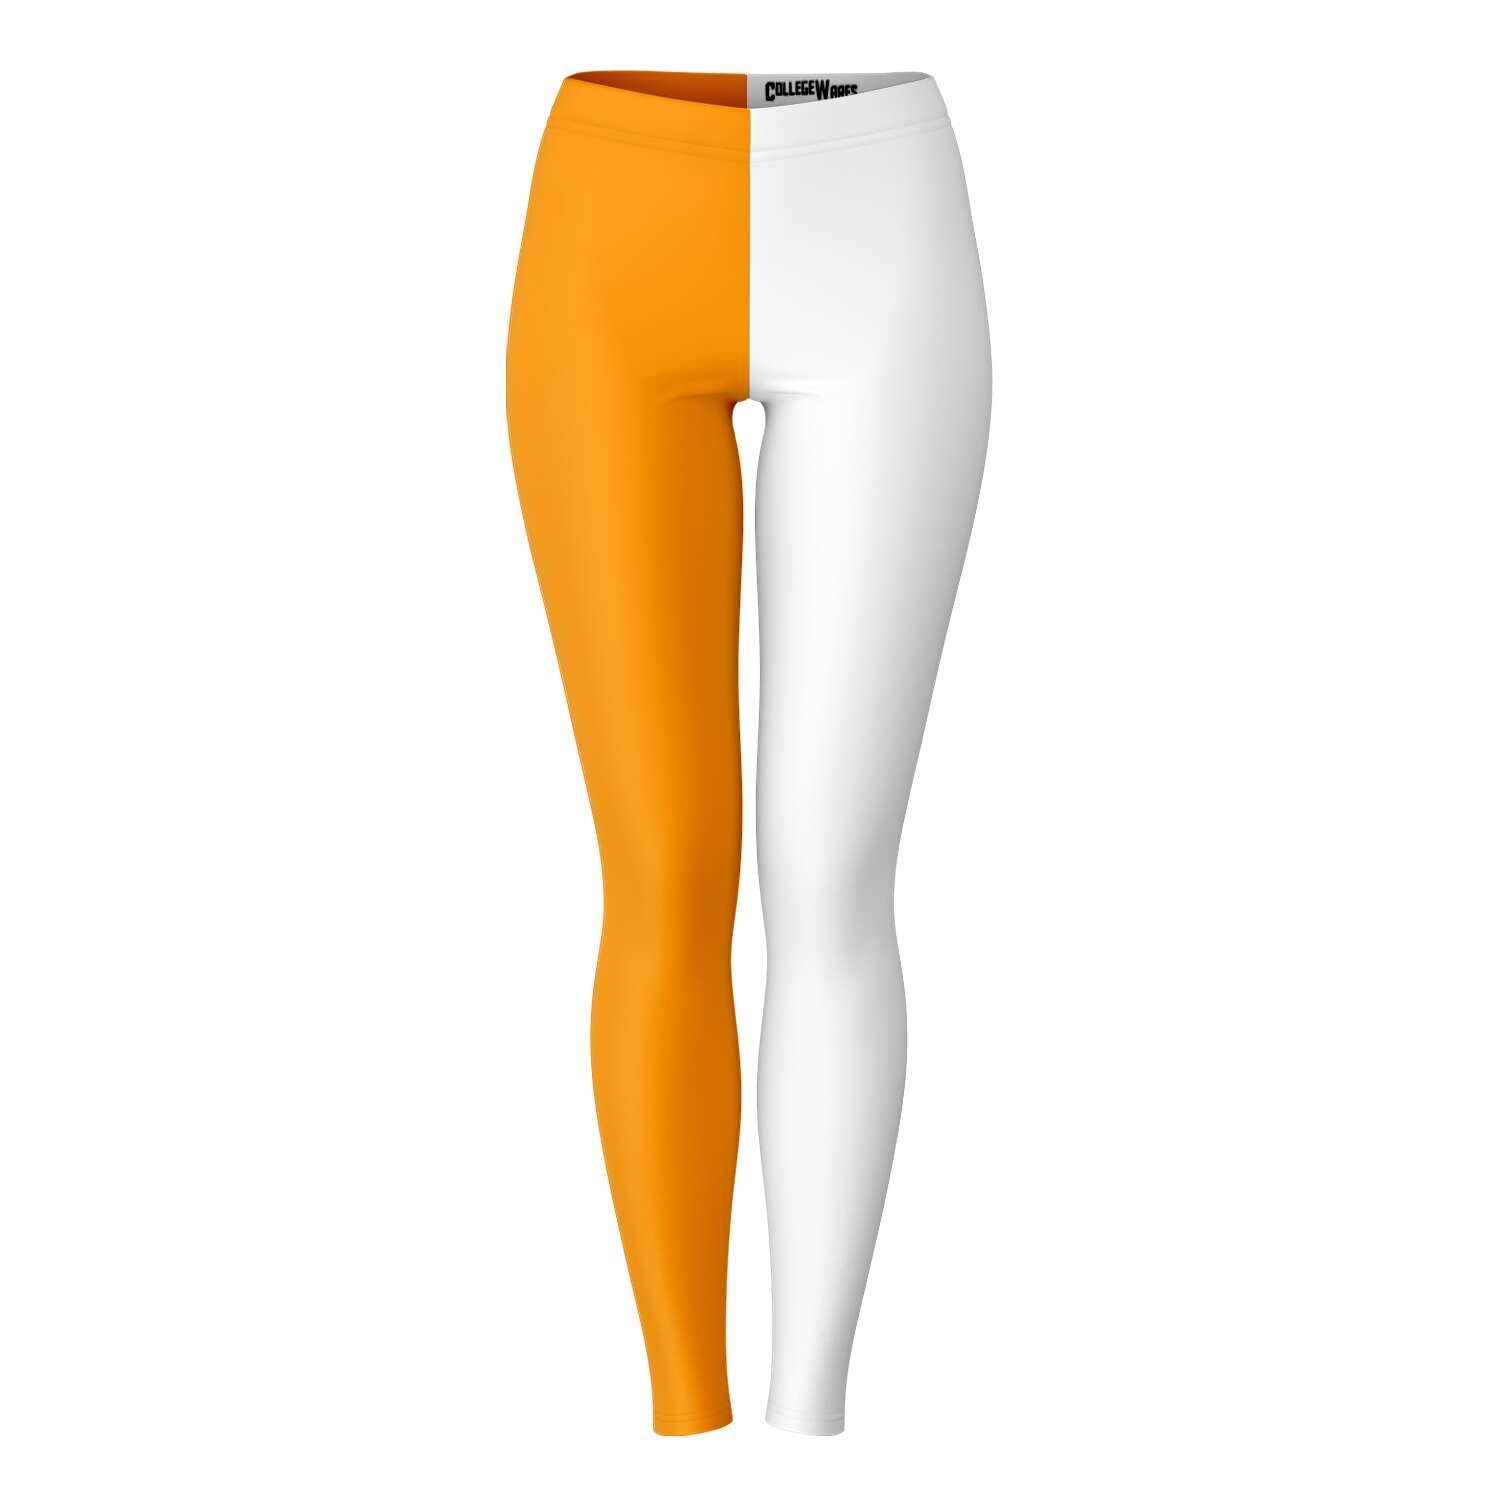 University of Tennessee Color Leggings